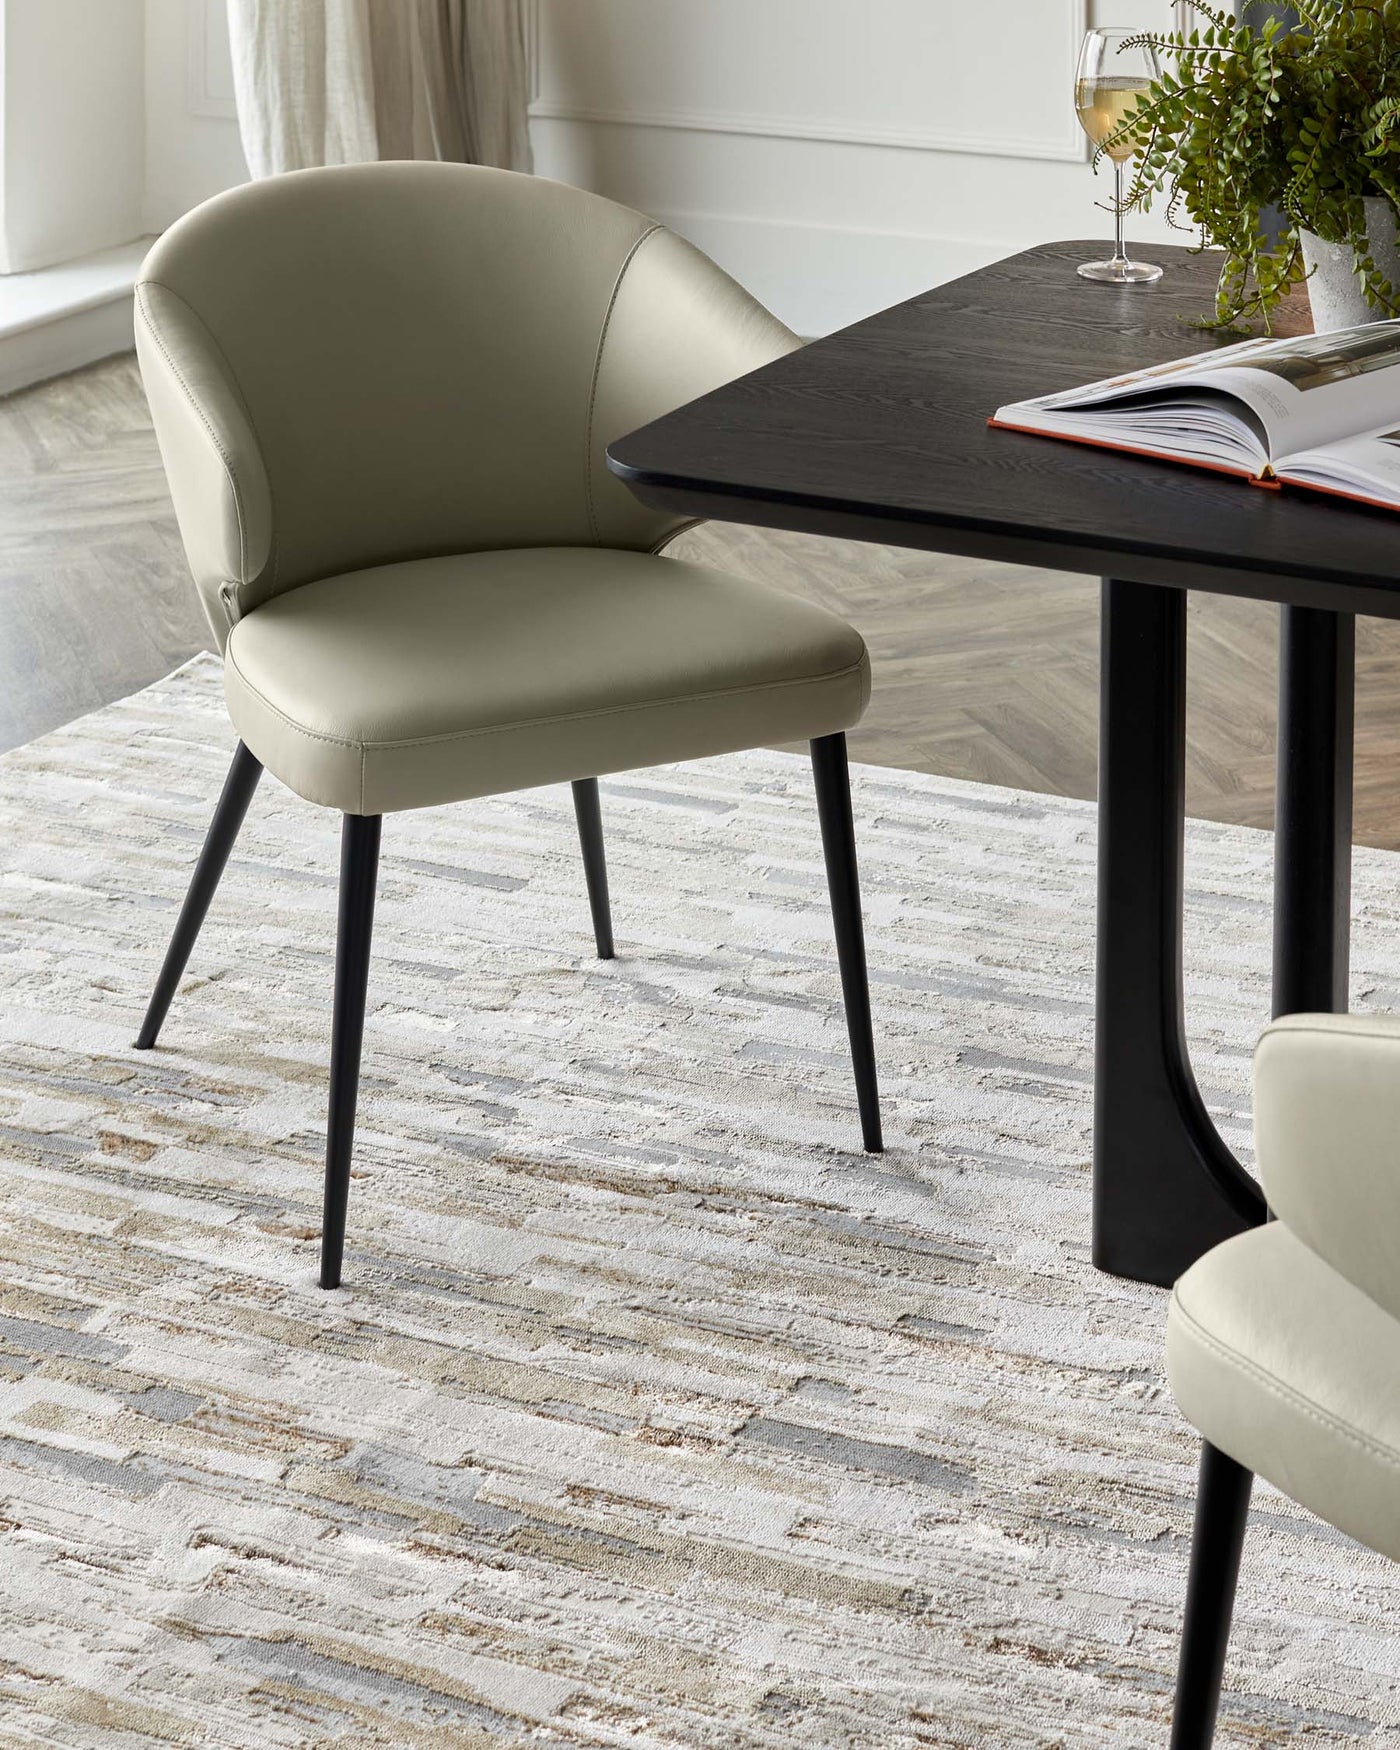 Contemporary-style furniture featuring a dark-stained wooden rectangular table with sleek black legs and a pair of elegant light grey upholstered dining chairs with a curved backrest and black tapered legs, set on a textured off-white area rug.